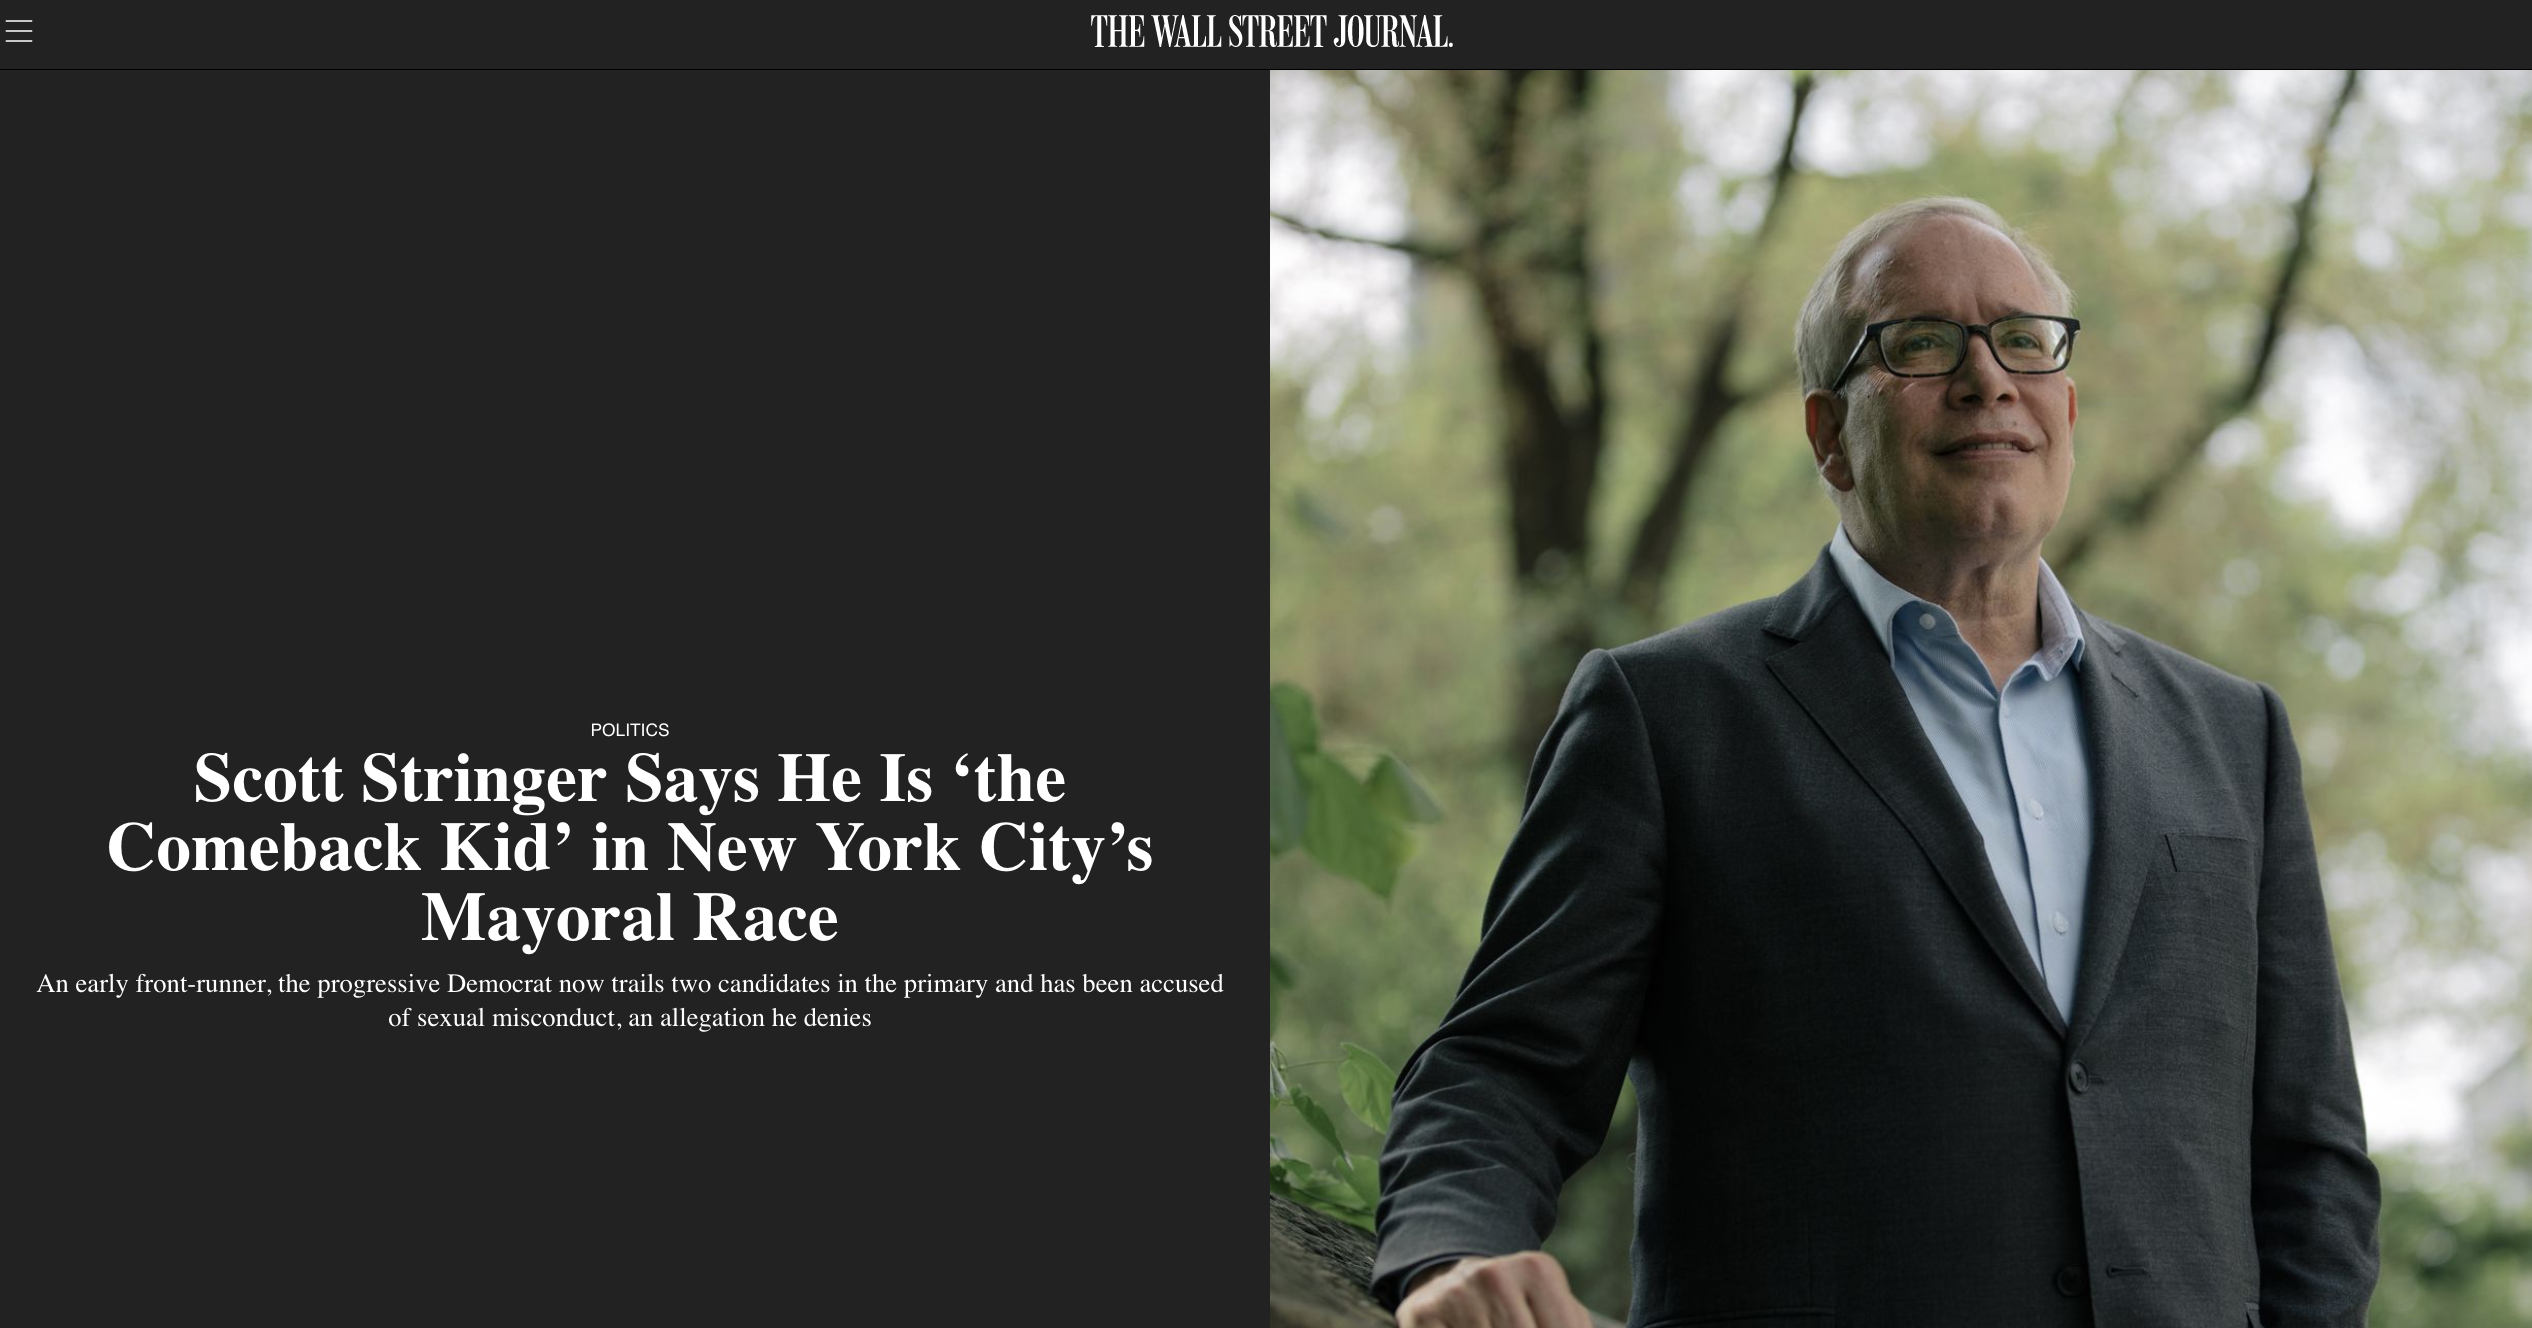 for The Wall Street Journal: Scott Stringer Says He Is "˜the Comeback Kid' in New York City's Mayoral Race 